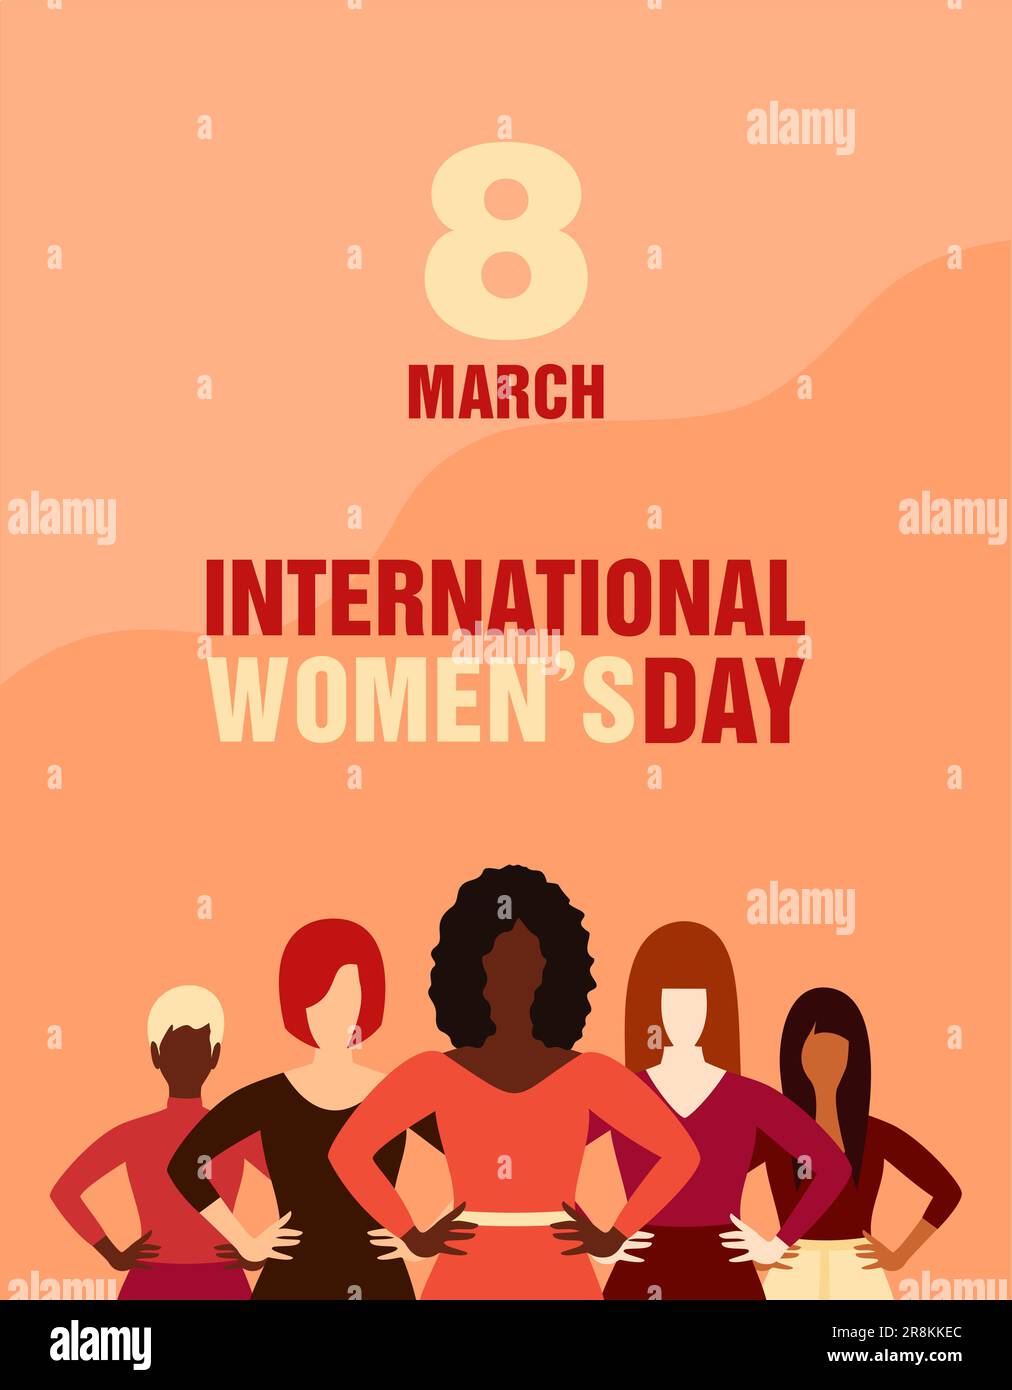 International women's day poster. Women of different ethnicities standing together in a row. Flat vector illustration Stock Vector